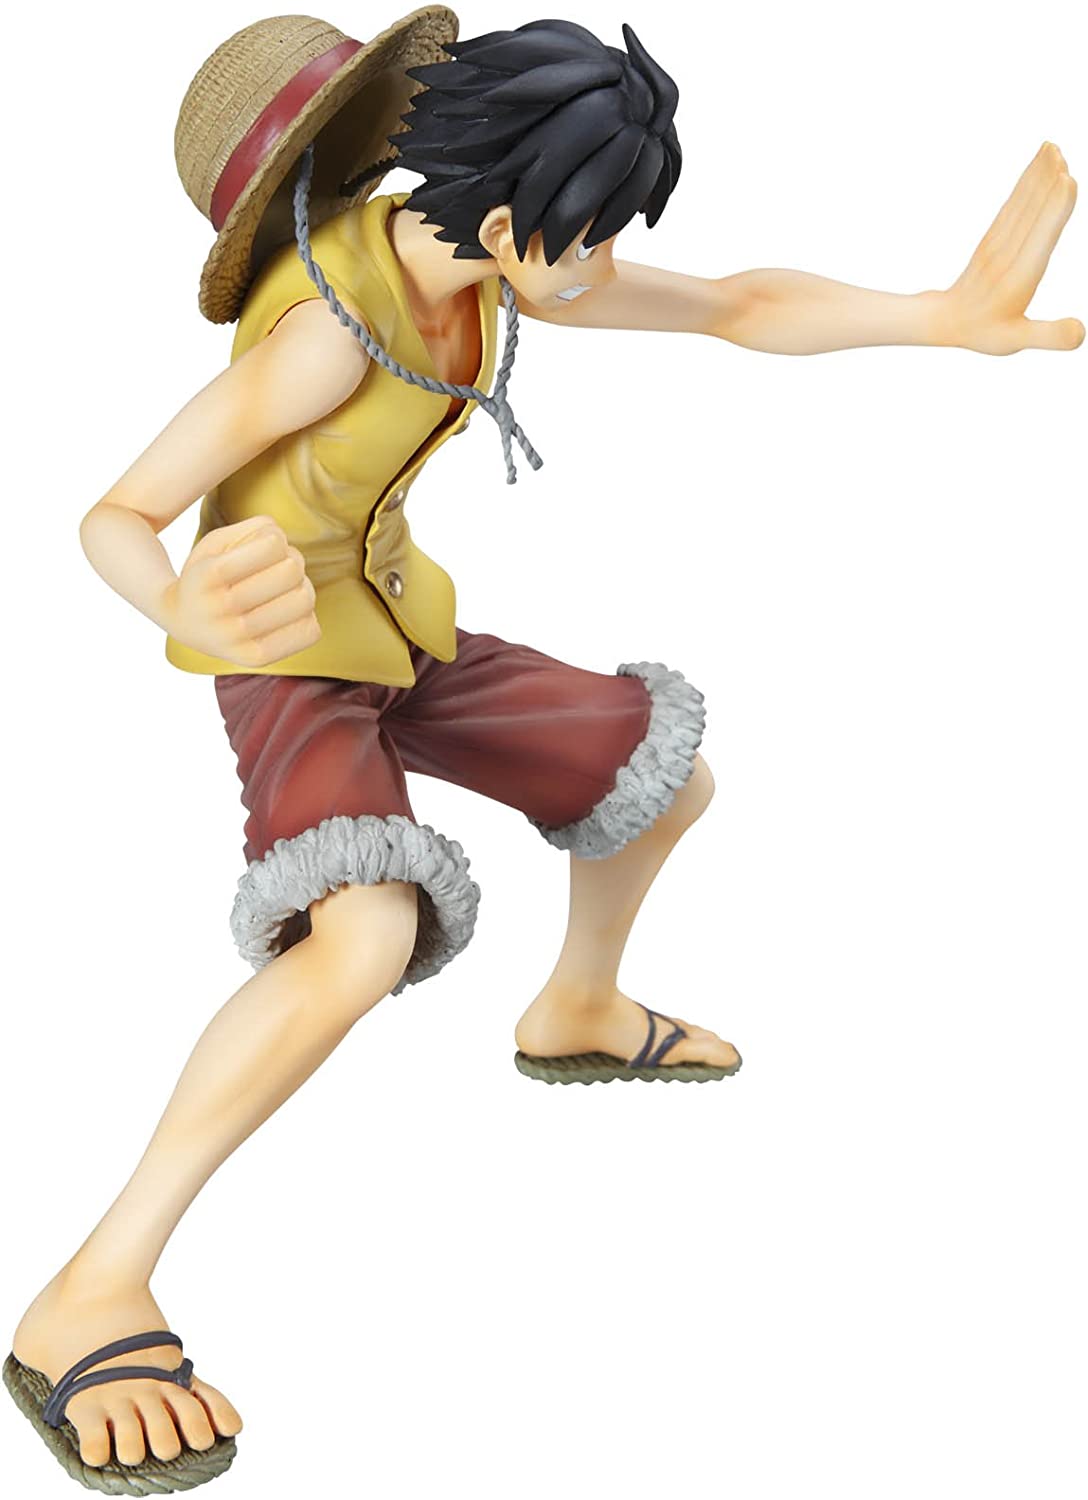 Excellent Model Portrait.Of.Pirates ONE PIECE NEO-DX Monkey D. Luffy Complete Figure | animota